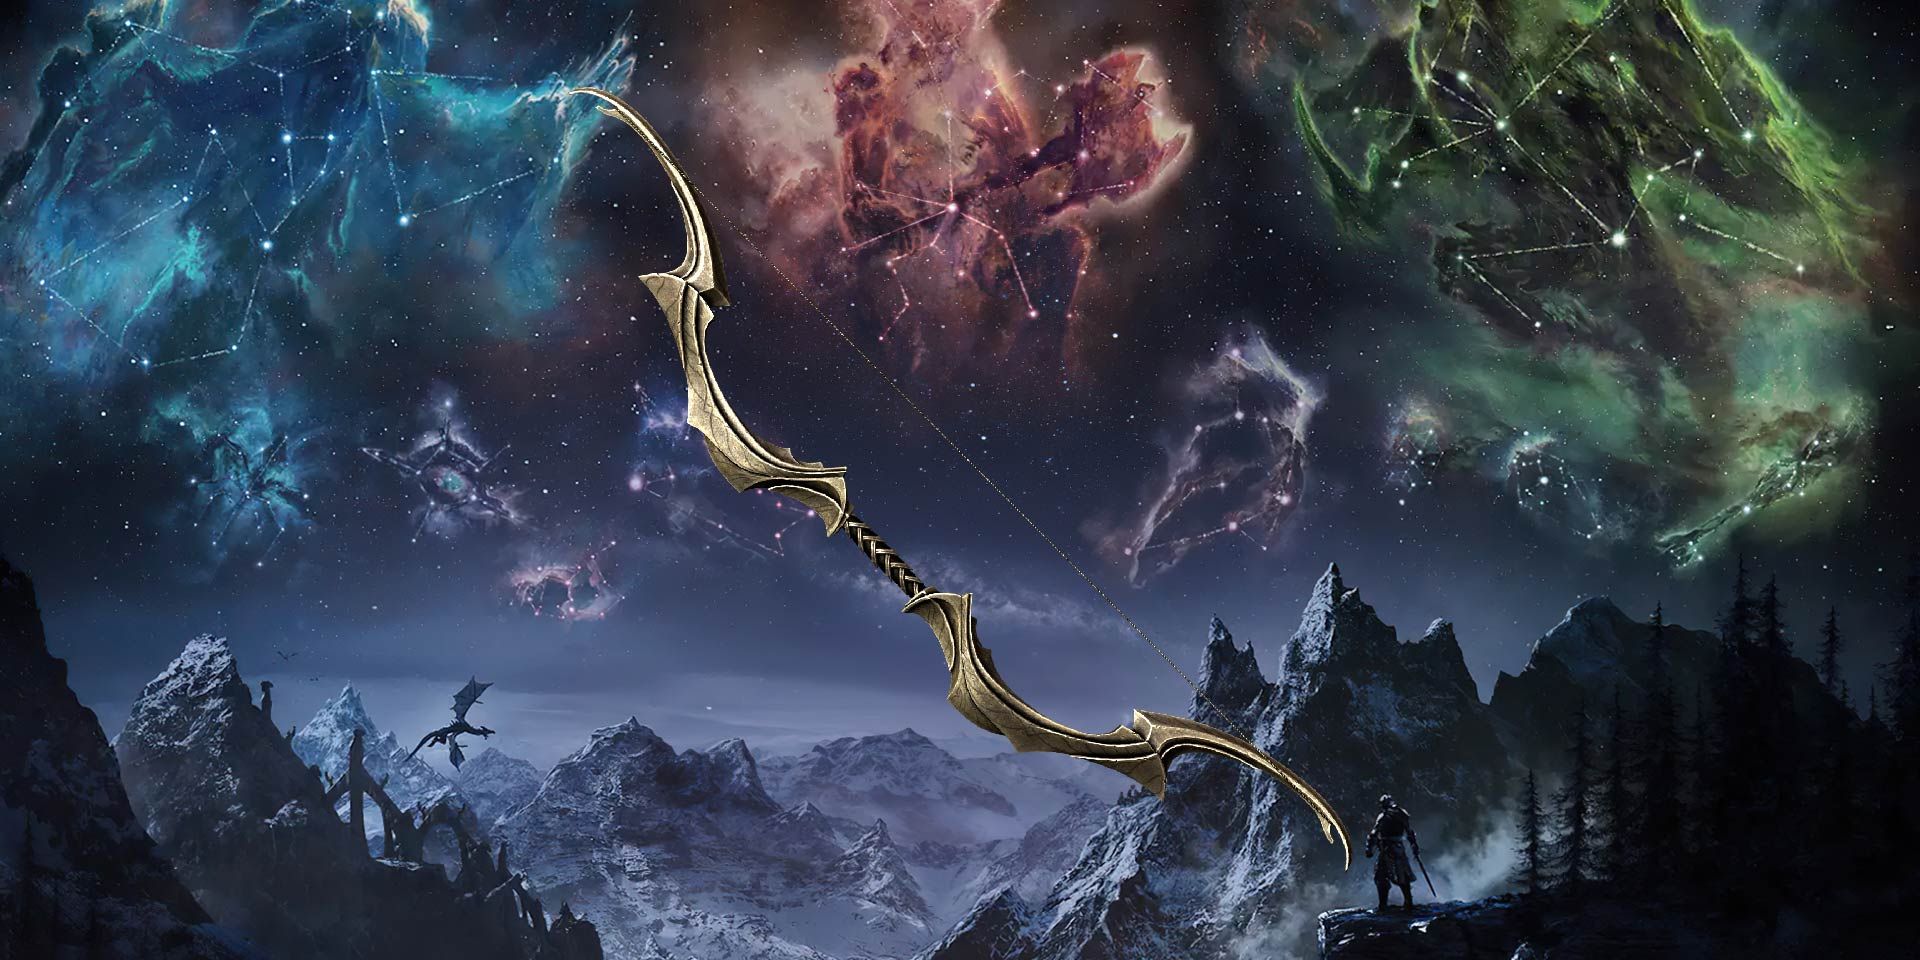 Auriel's Bow among mountains and Elder Scrolls star signs.